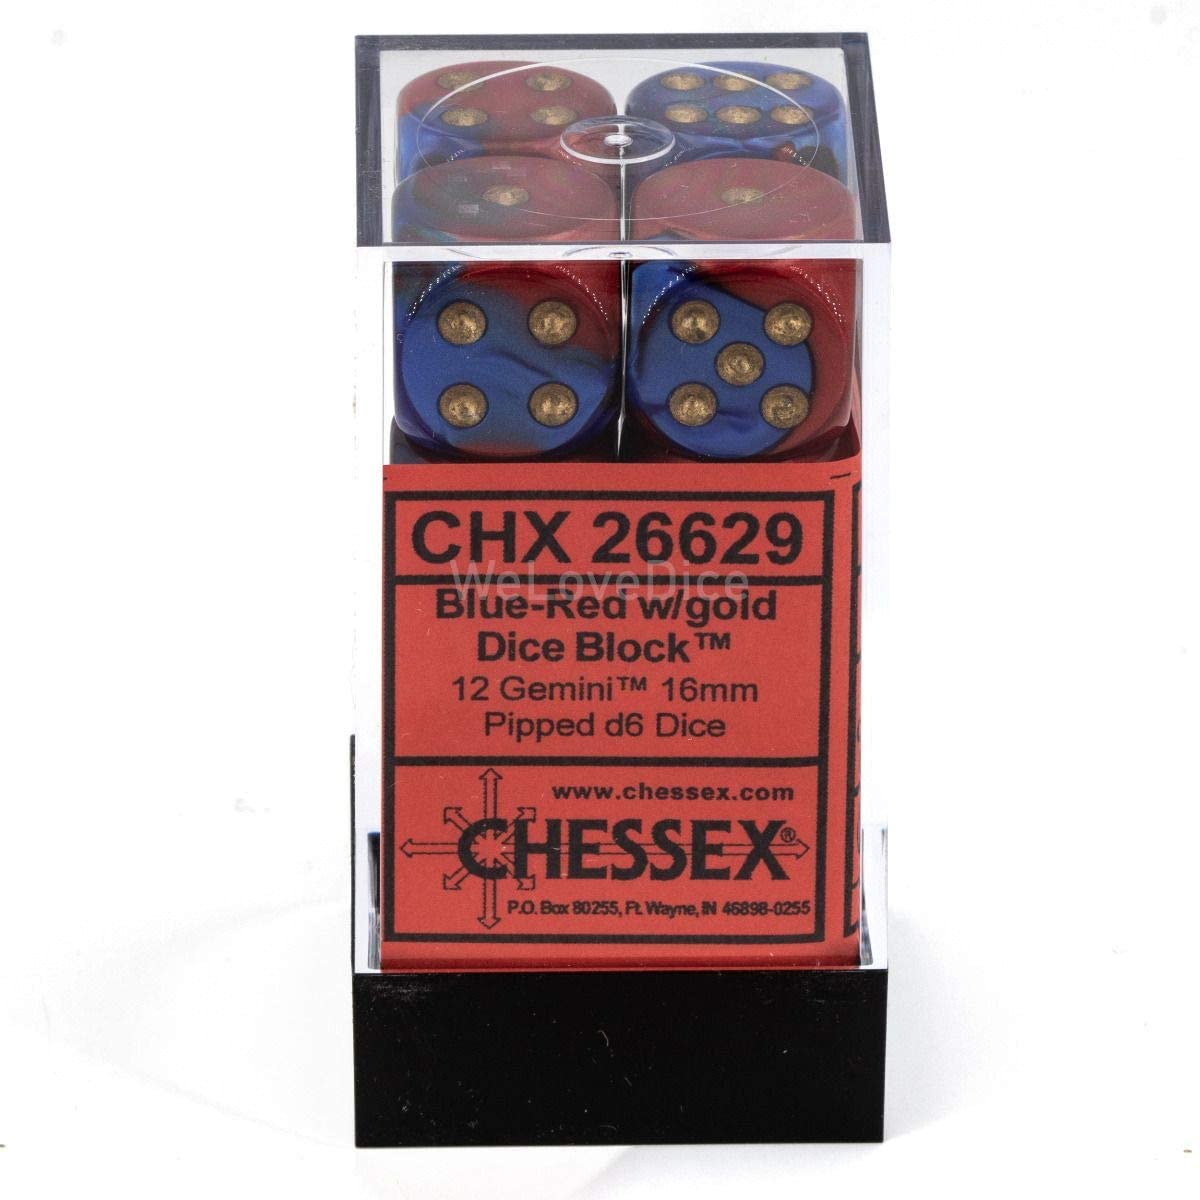 Chessex Dice: D6 Block 16mm - Gemini - Blue-Red with Gold (CHX 26629) - Gamescape